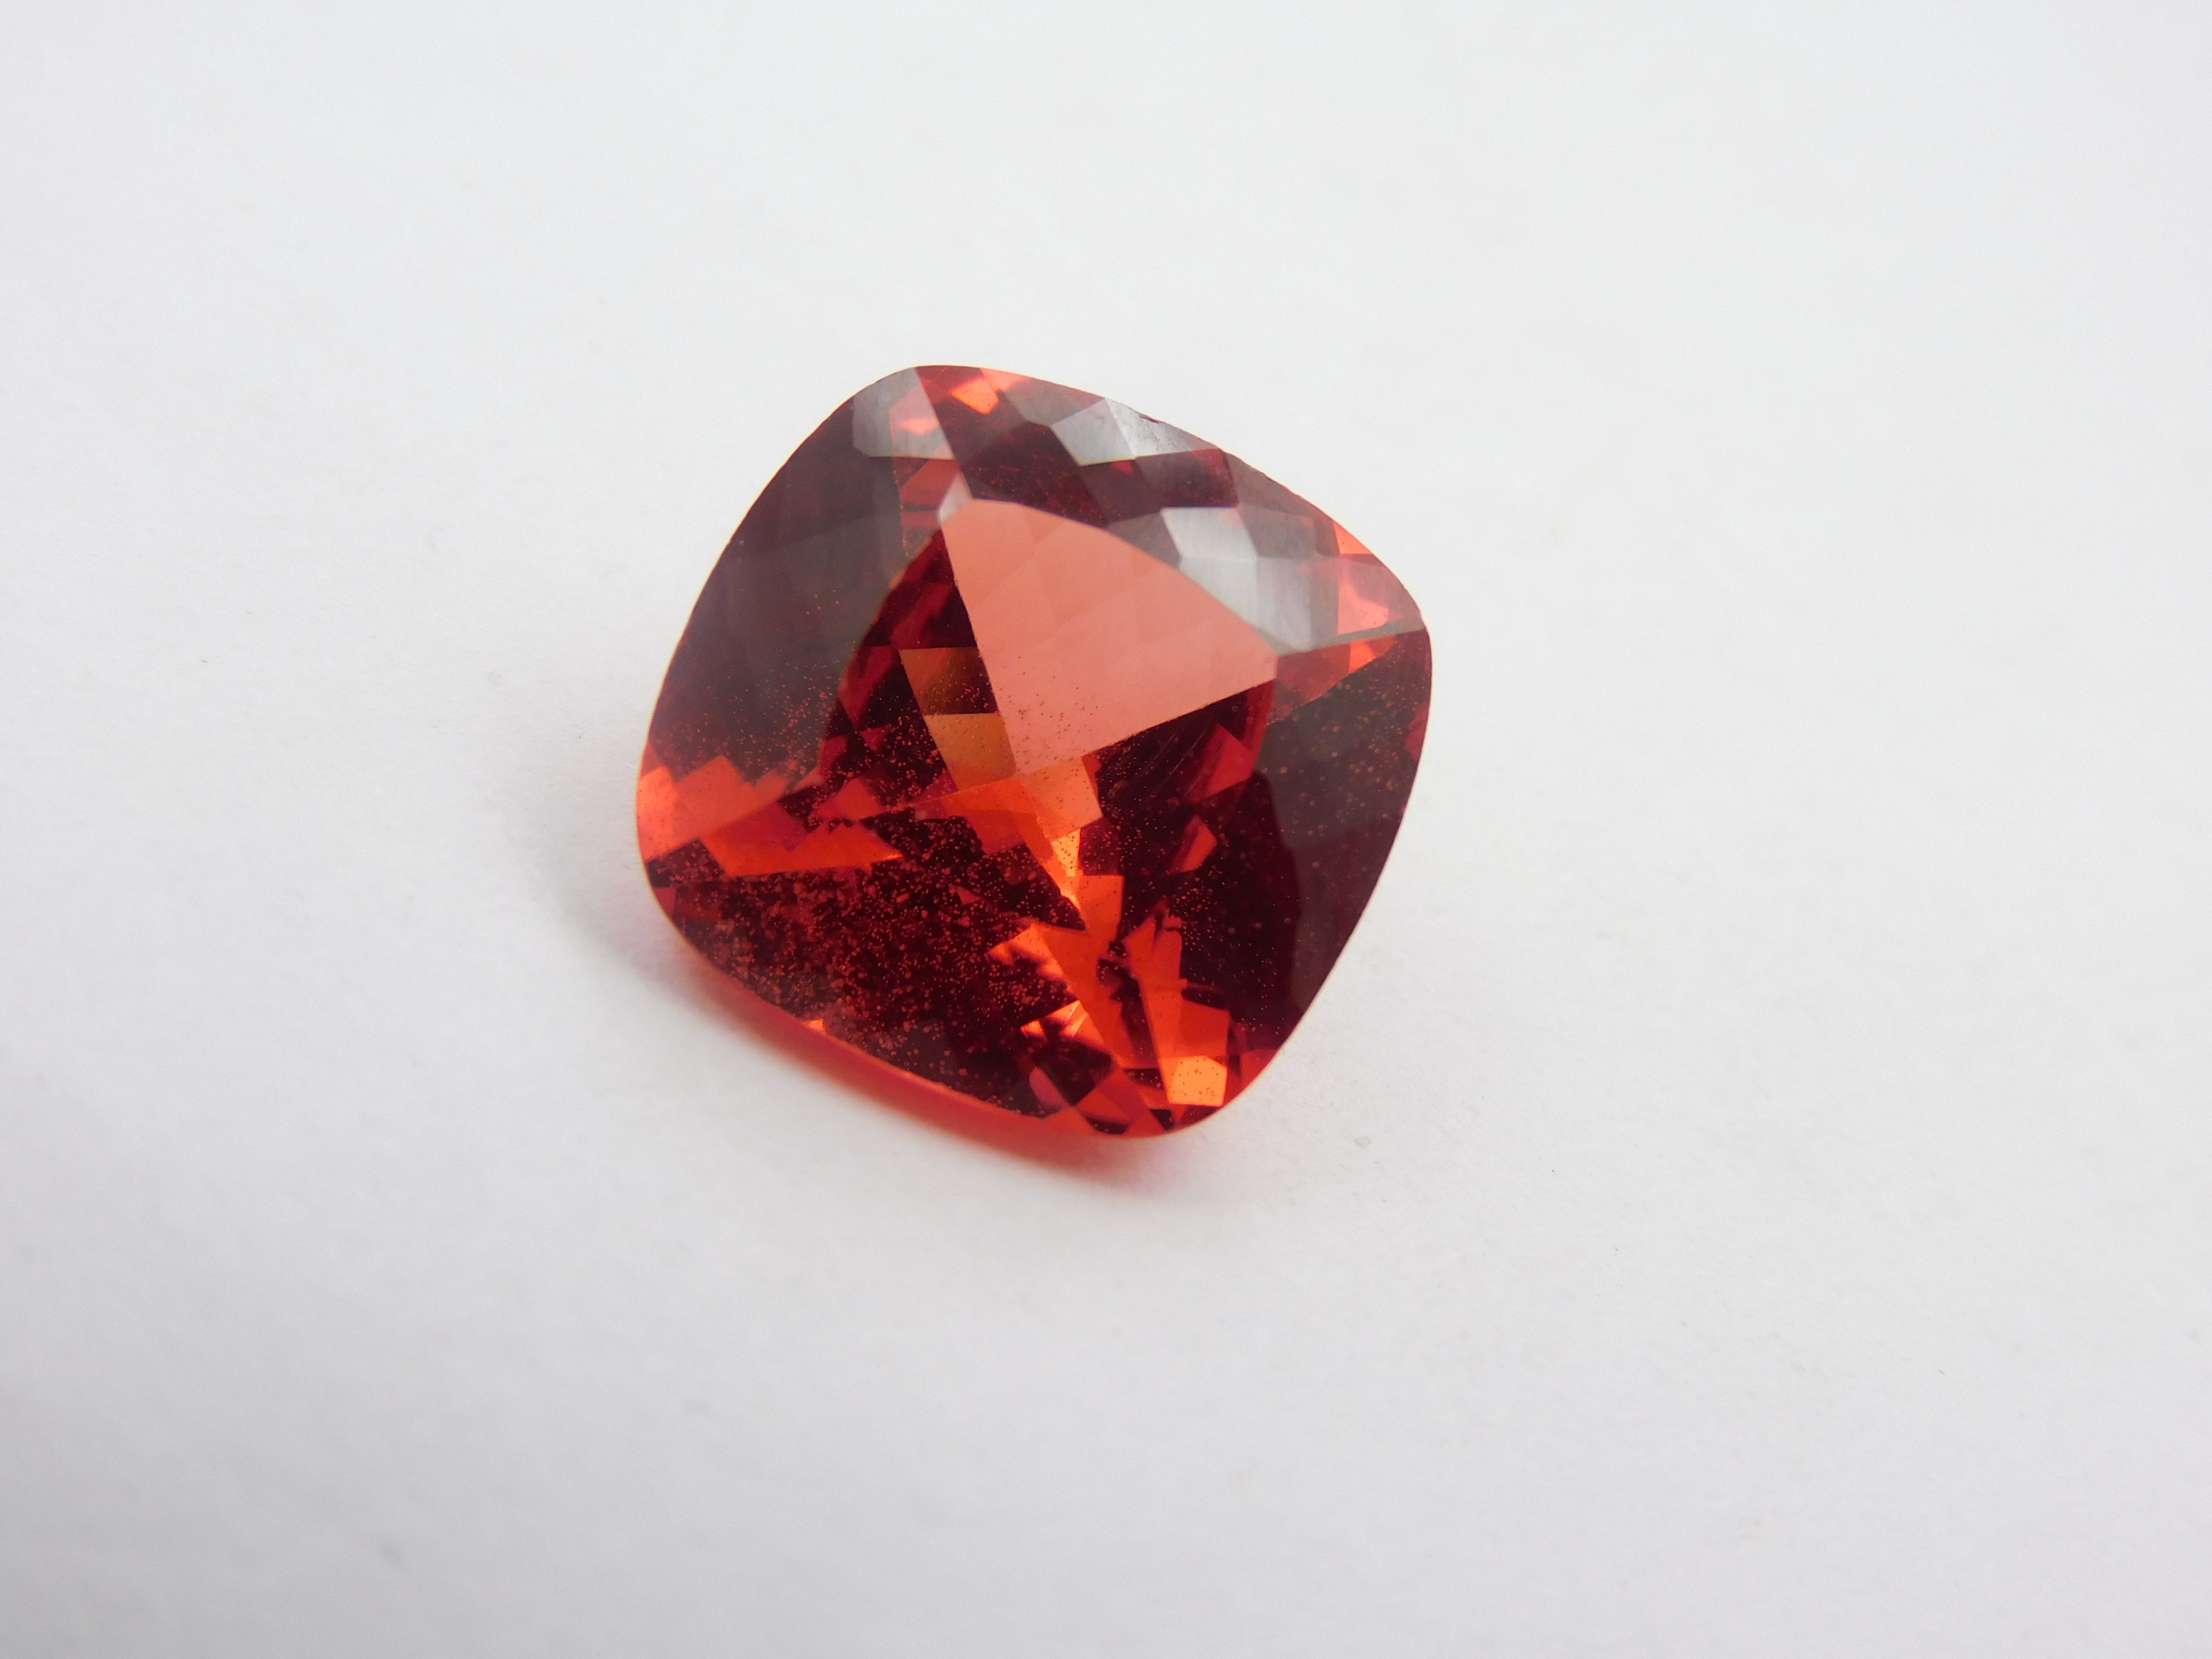 Sapphire Jwelery For Her/ Him | Gift For Her Birthday | 7.65 Carat Orange Color Square Cushion Shape Natural Certified Sapphire Loose Gemstone Free Shipping Free Gift